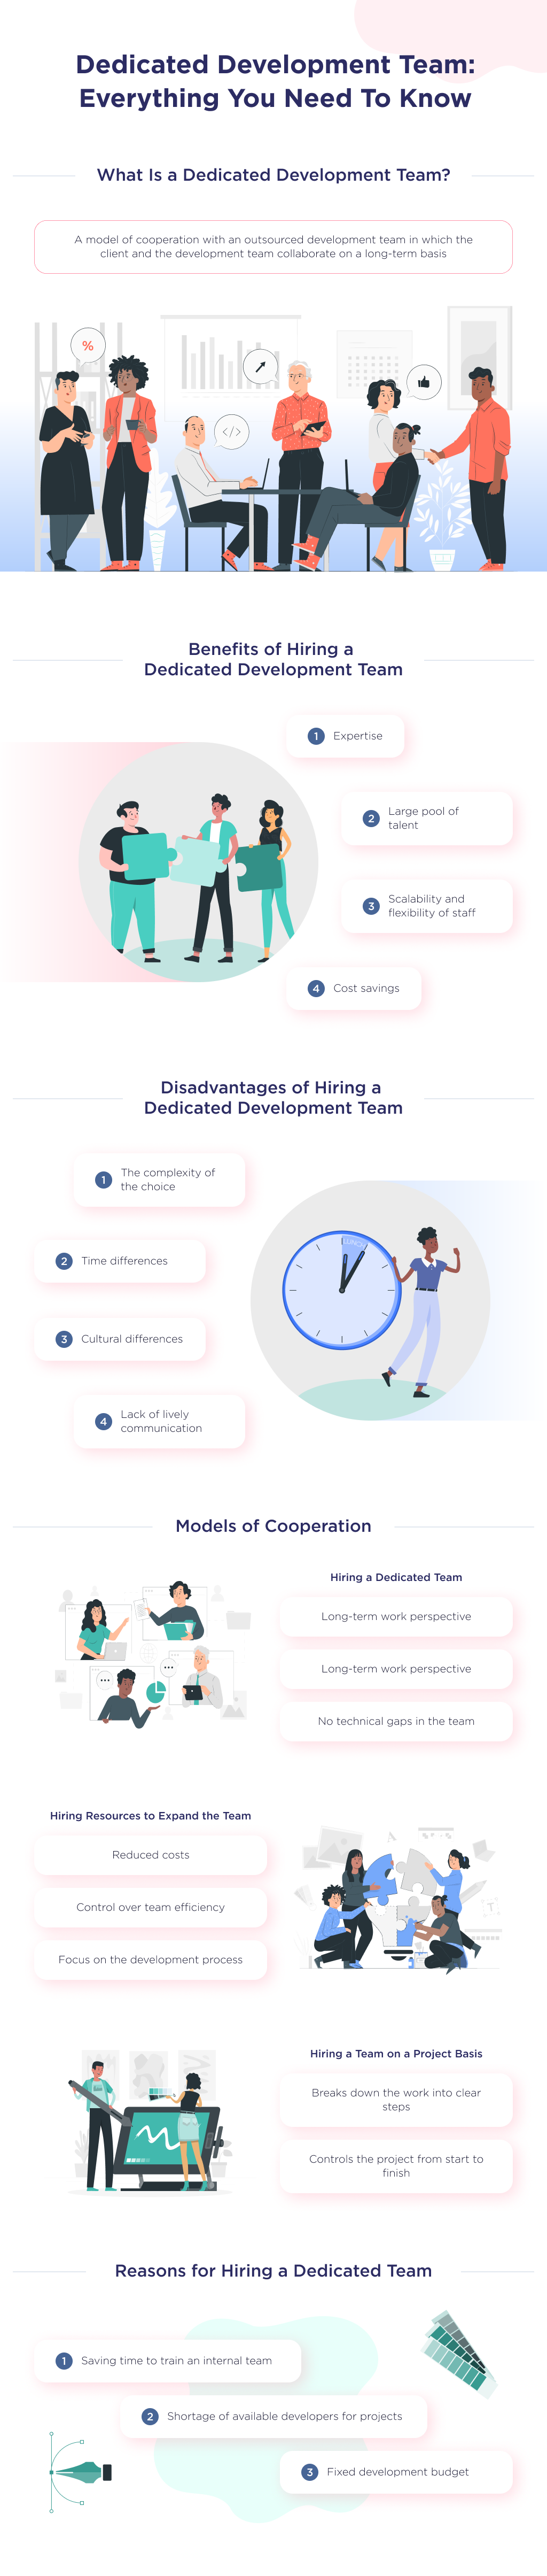 This infographic shows a detailed explanation of what a dedicated development team is, what the major advantages and disadvantages are, and when to consider hiring a dedicated development team